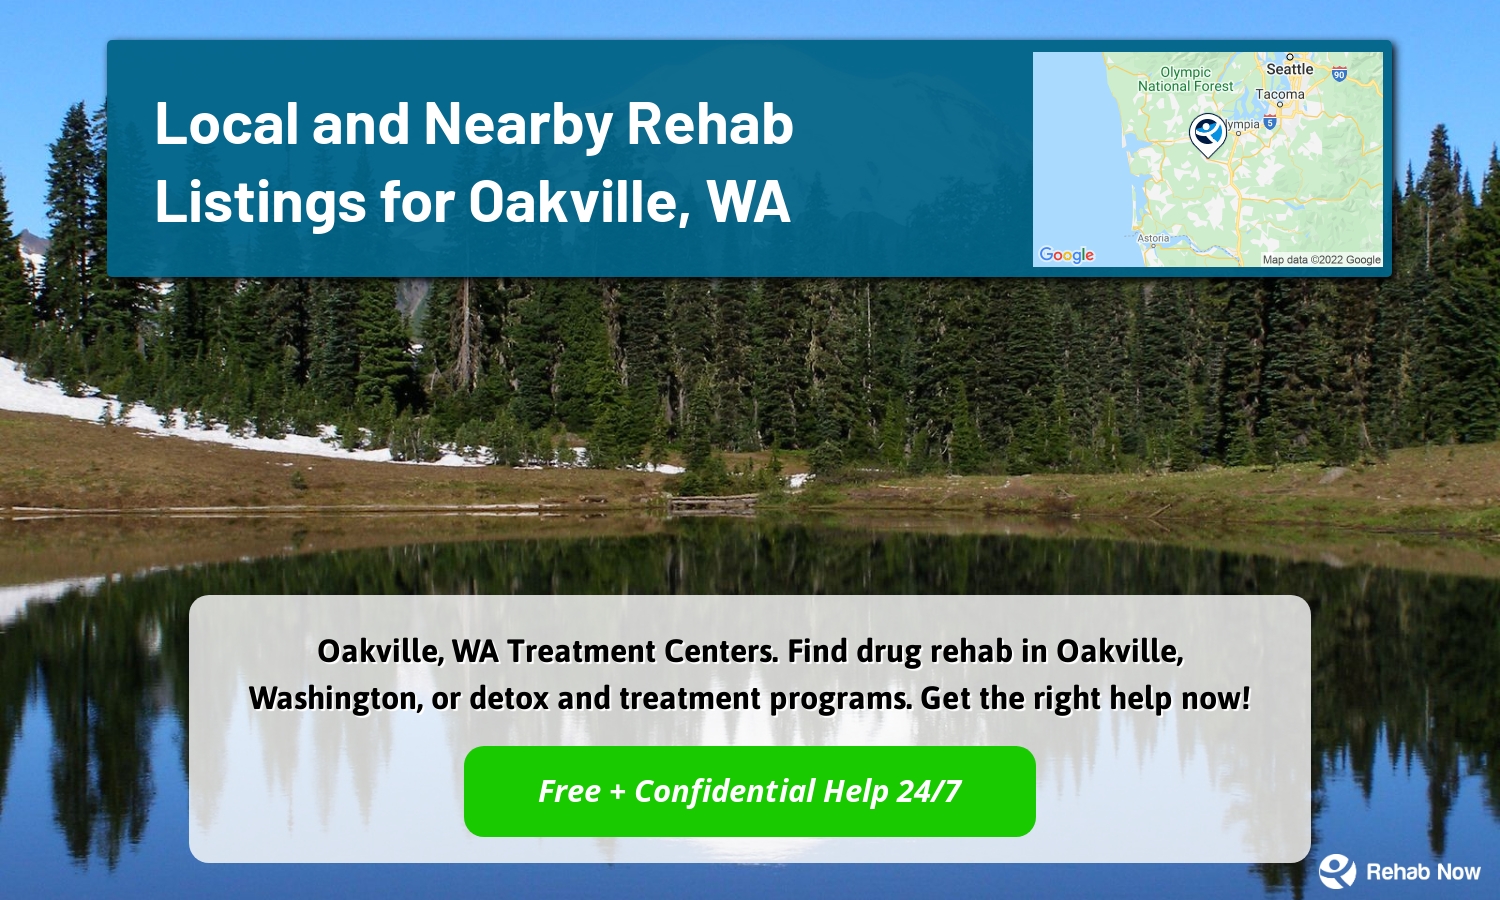 Oakville, WA Treatment Centers. Find drug rehab in Oakville, Washington, or detox and treatment programs. Get the right help now!